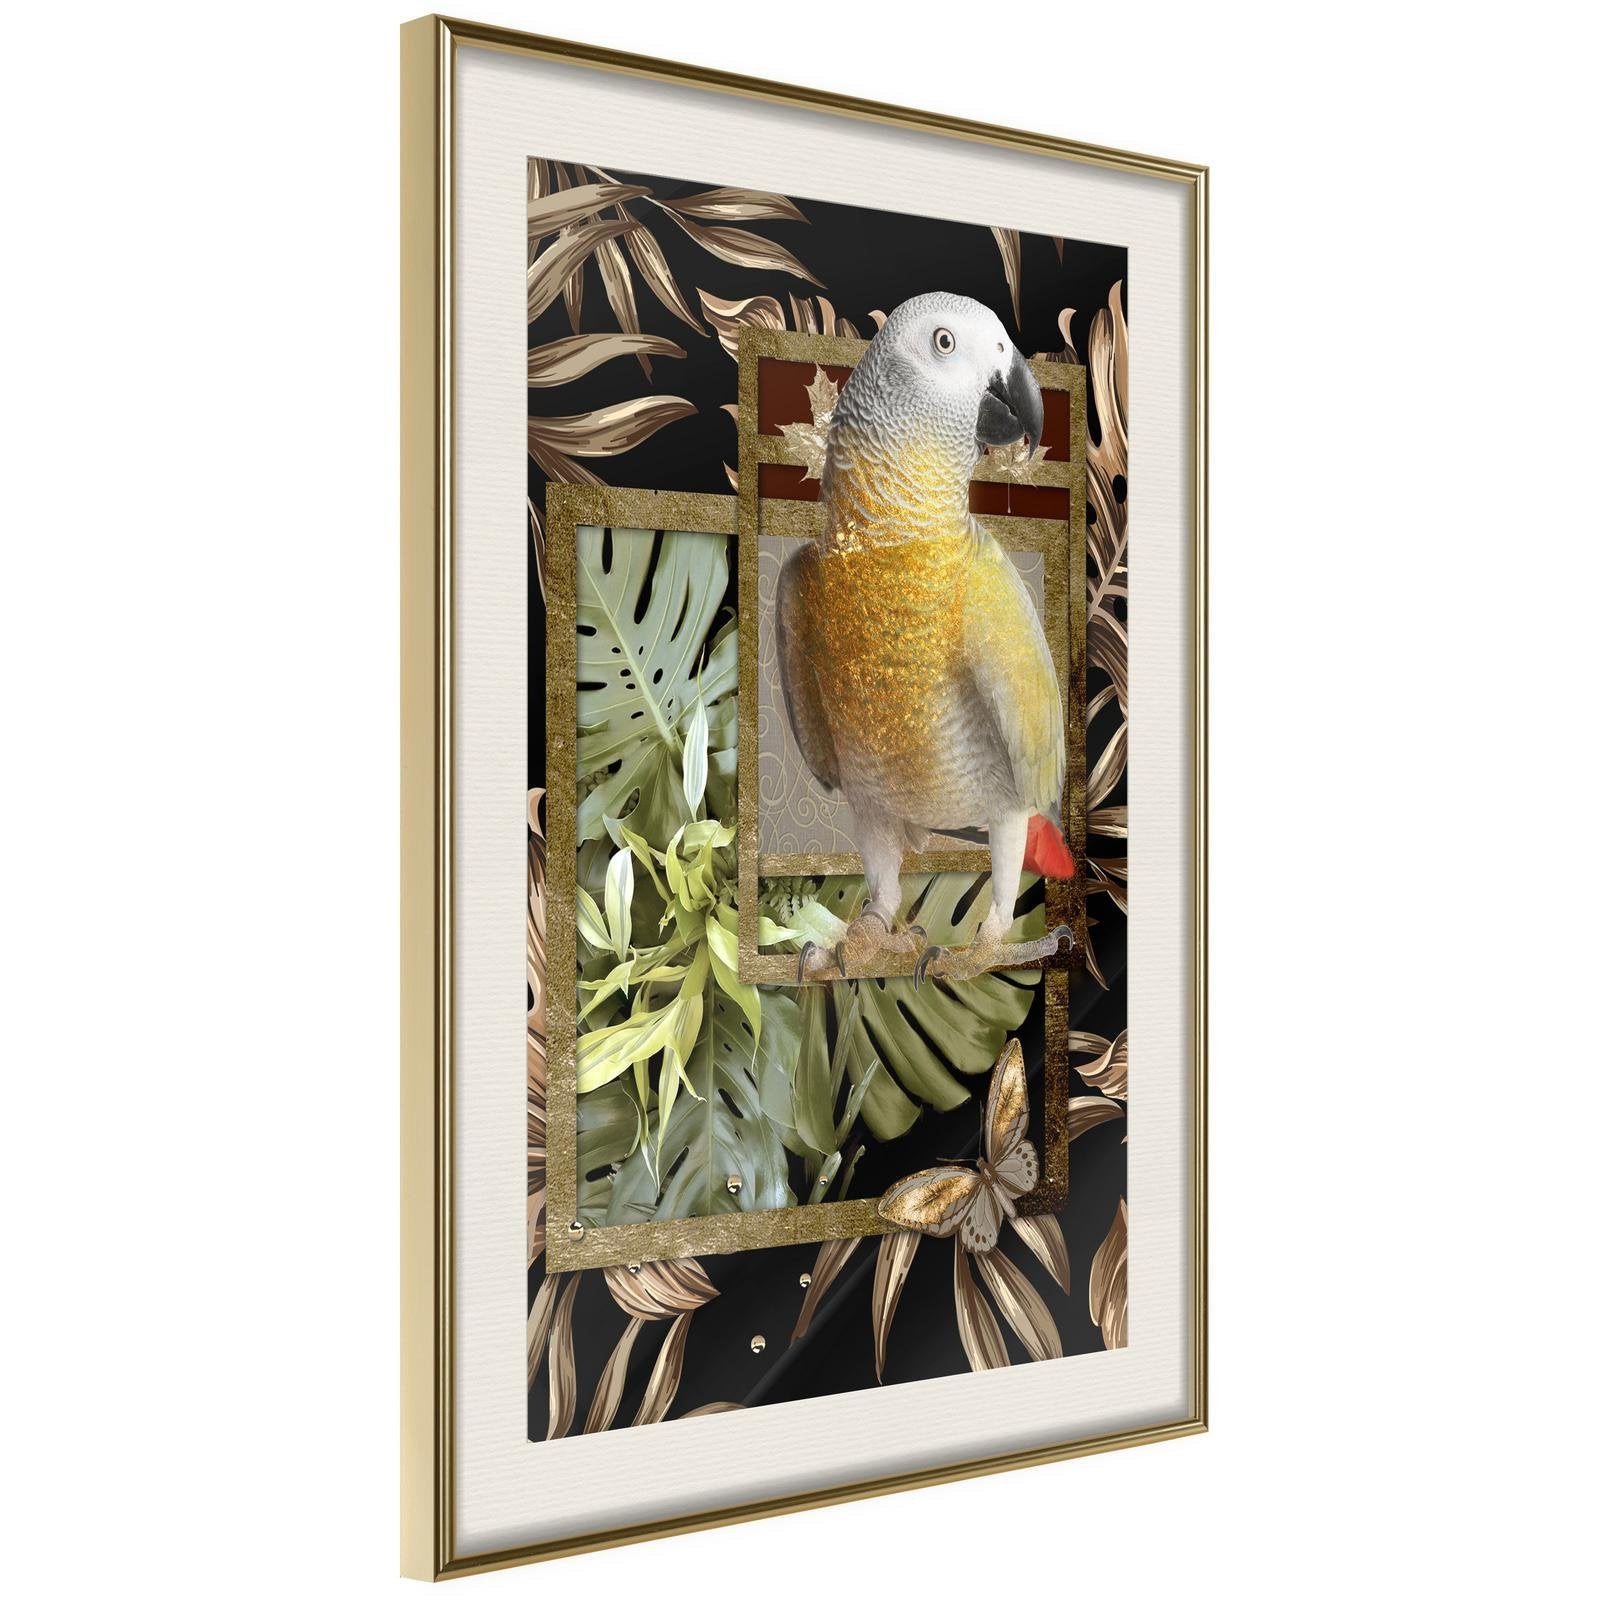 Inramad Poster / Tavla - Composition with Gold Parrot - 40x60 Guldram med passepartout